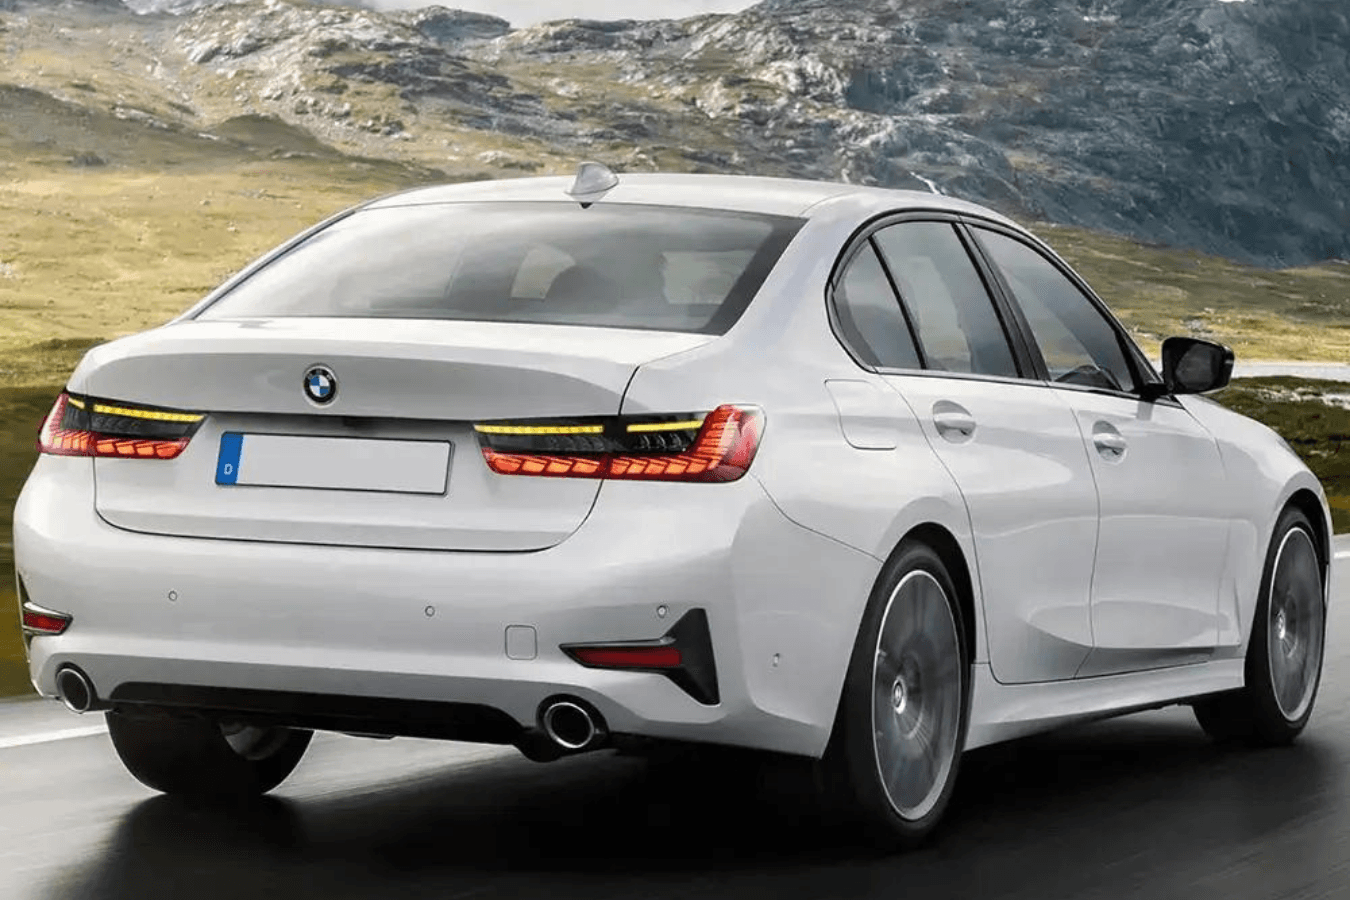 BMW 3-Series G20/G28/G80 Dragon Scale Style Tail Lights (2019 - 2022) - K2 Industries